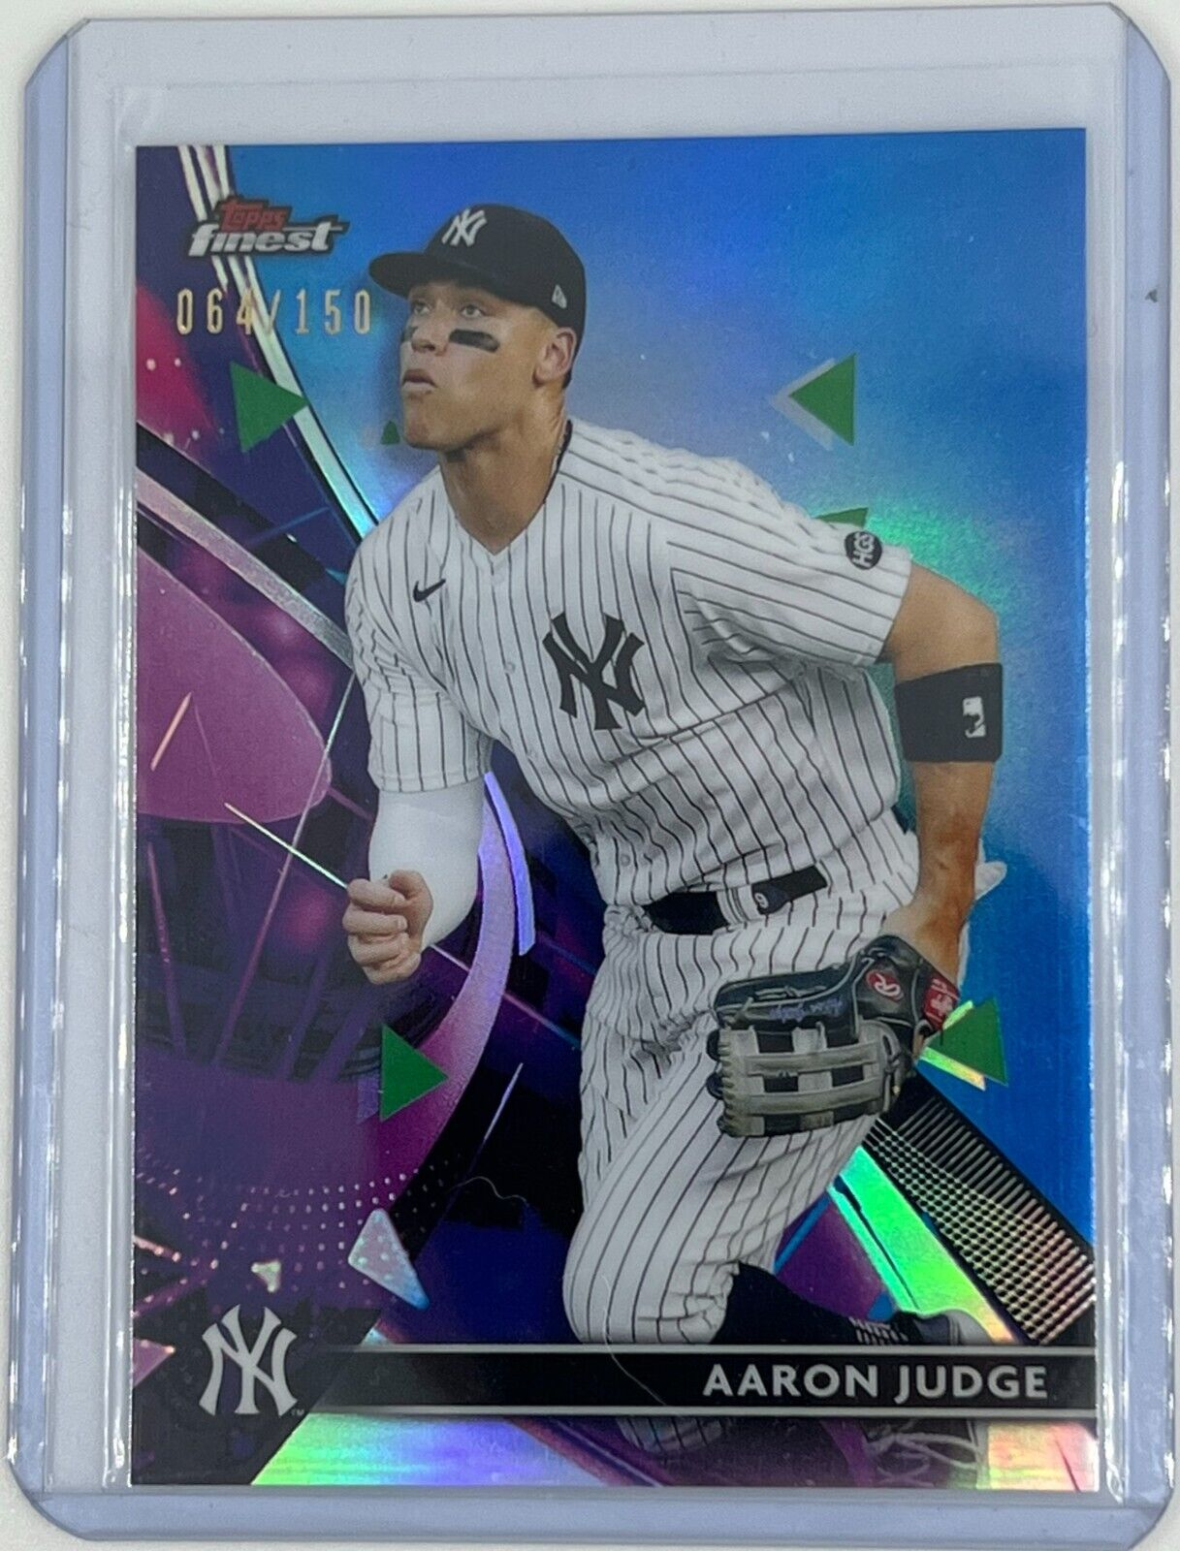 Most valuable Aaron Judge rookie cards: 2017 Topps Finest Aaron Judge Rookie Card #77